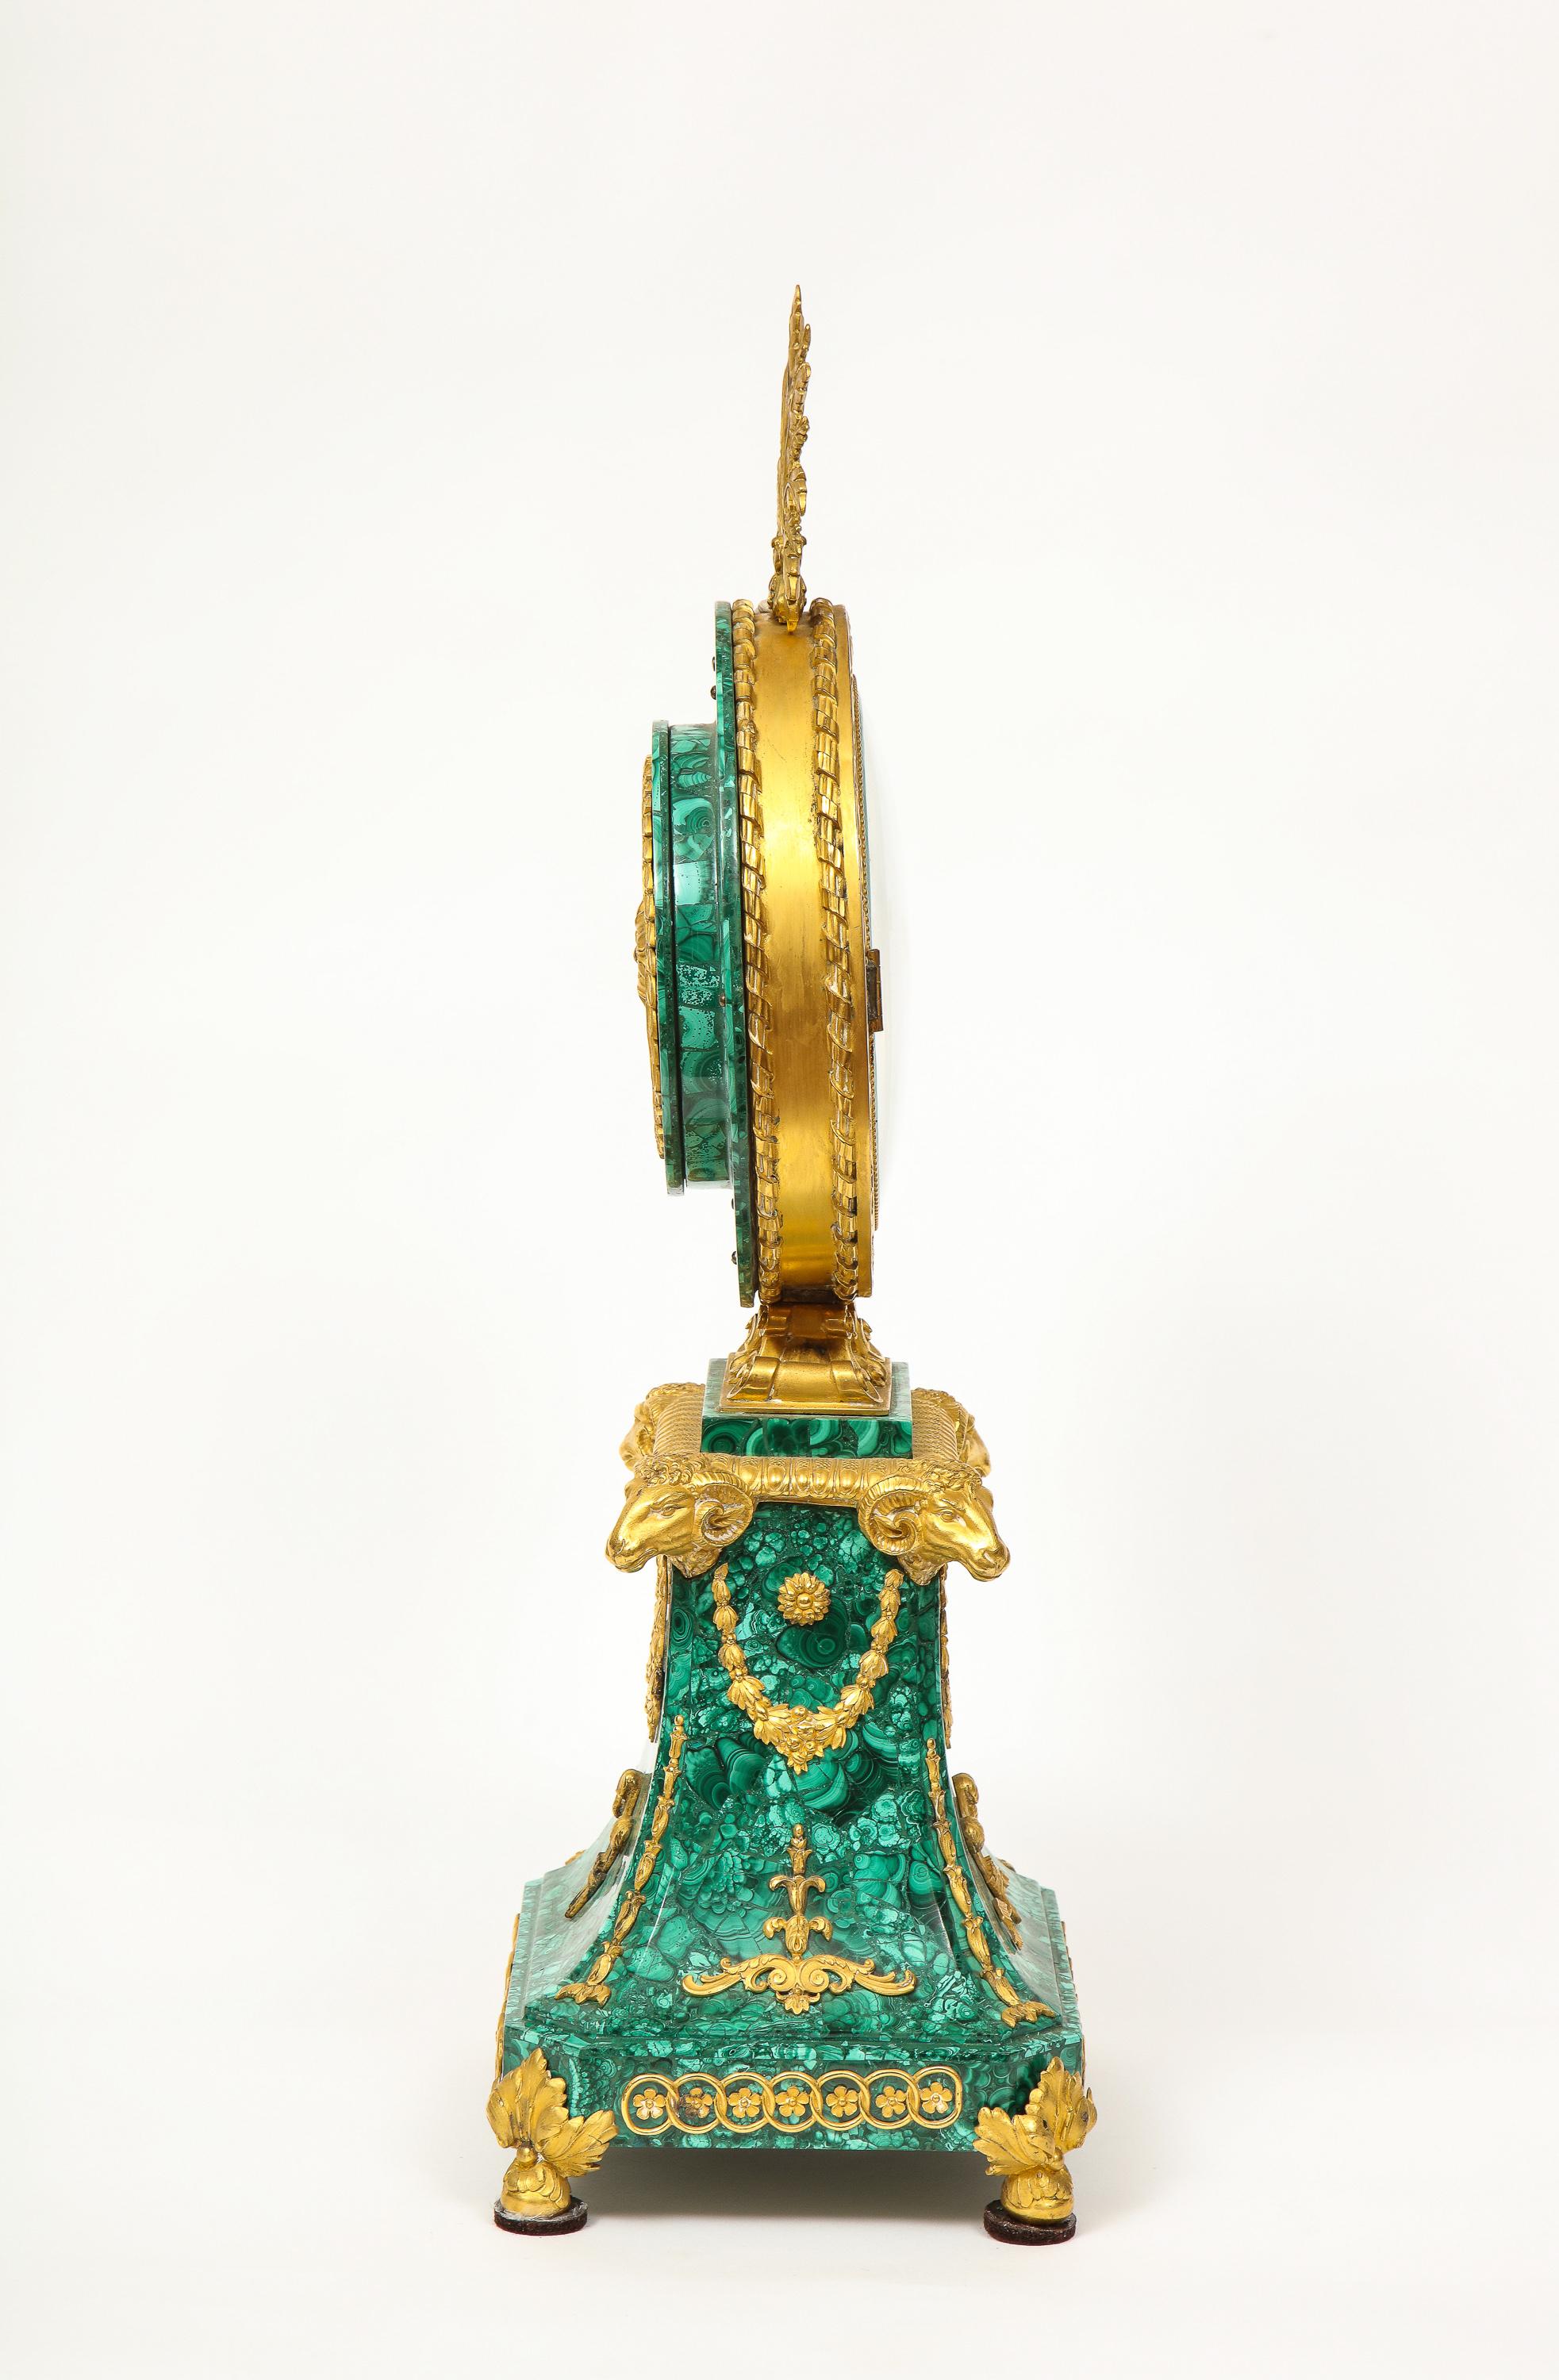 Edward F. Caldwell, An Extremely Fine and Rare Ormolu-Mounted Malachite Clock For Sale 8